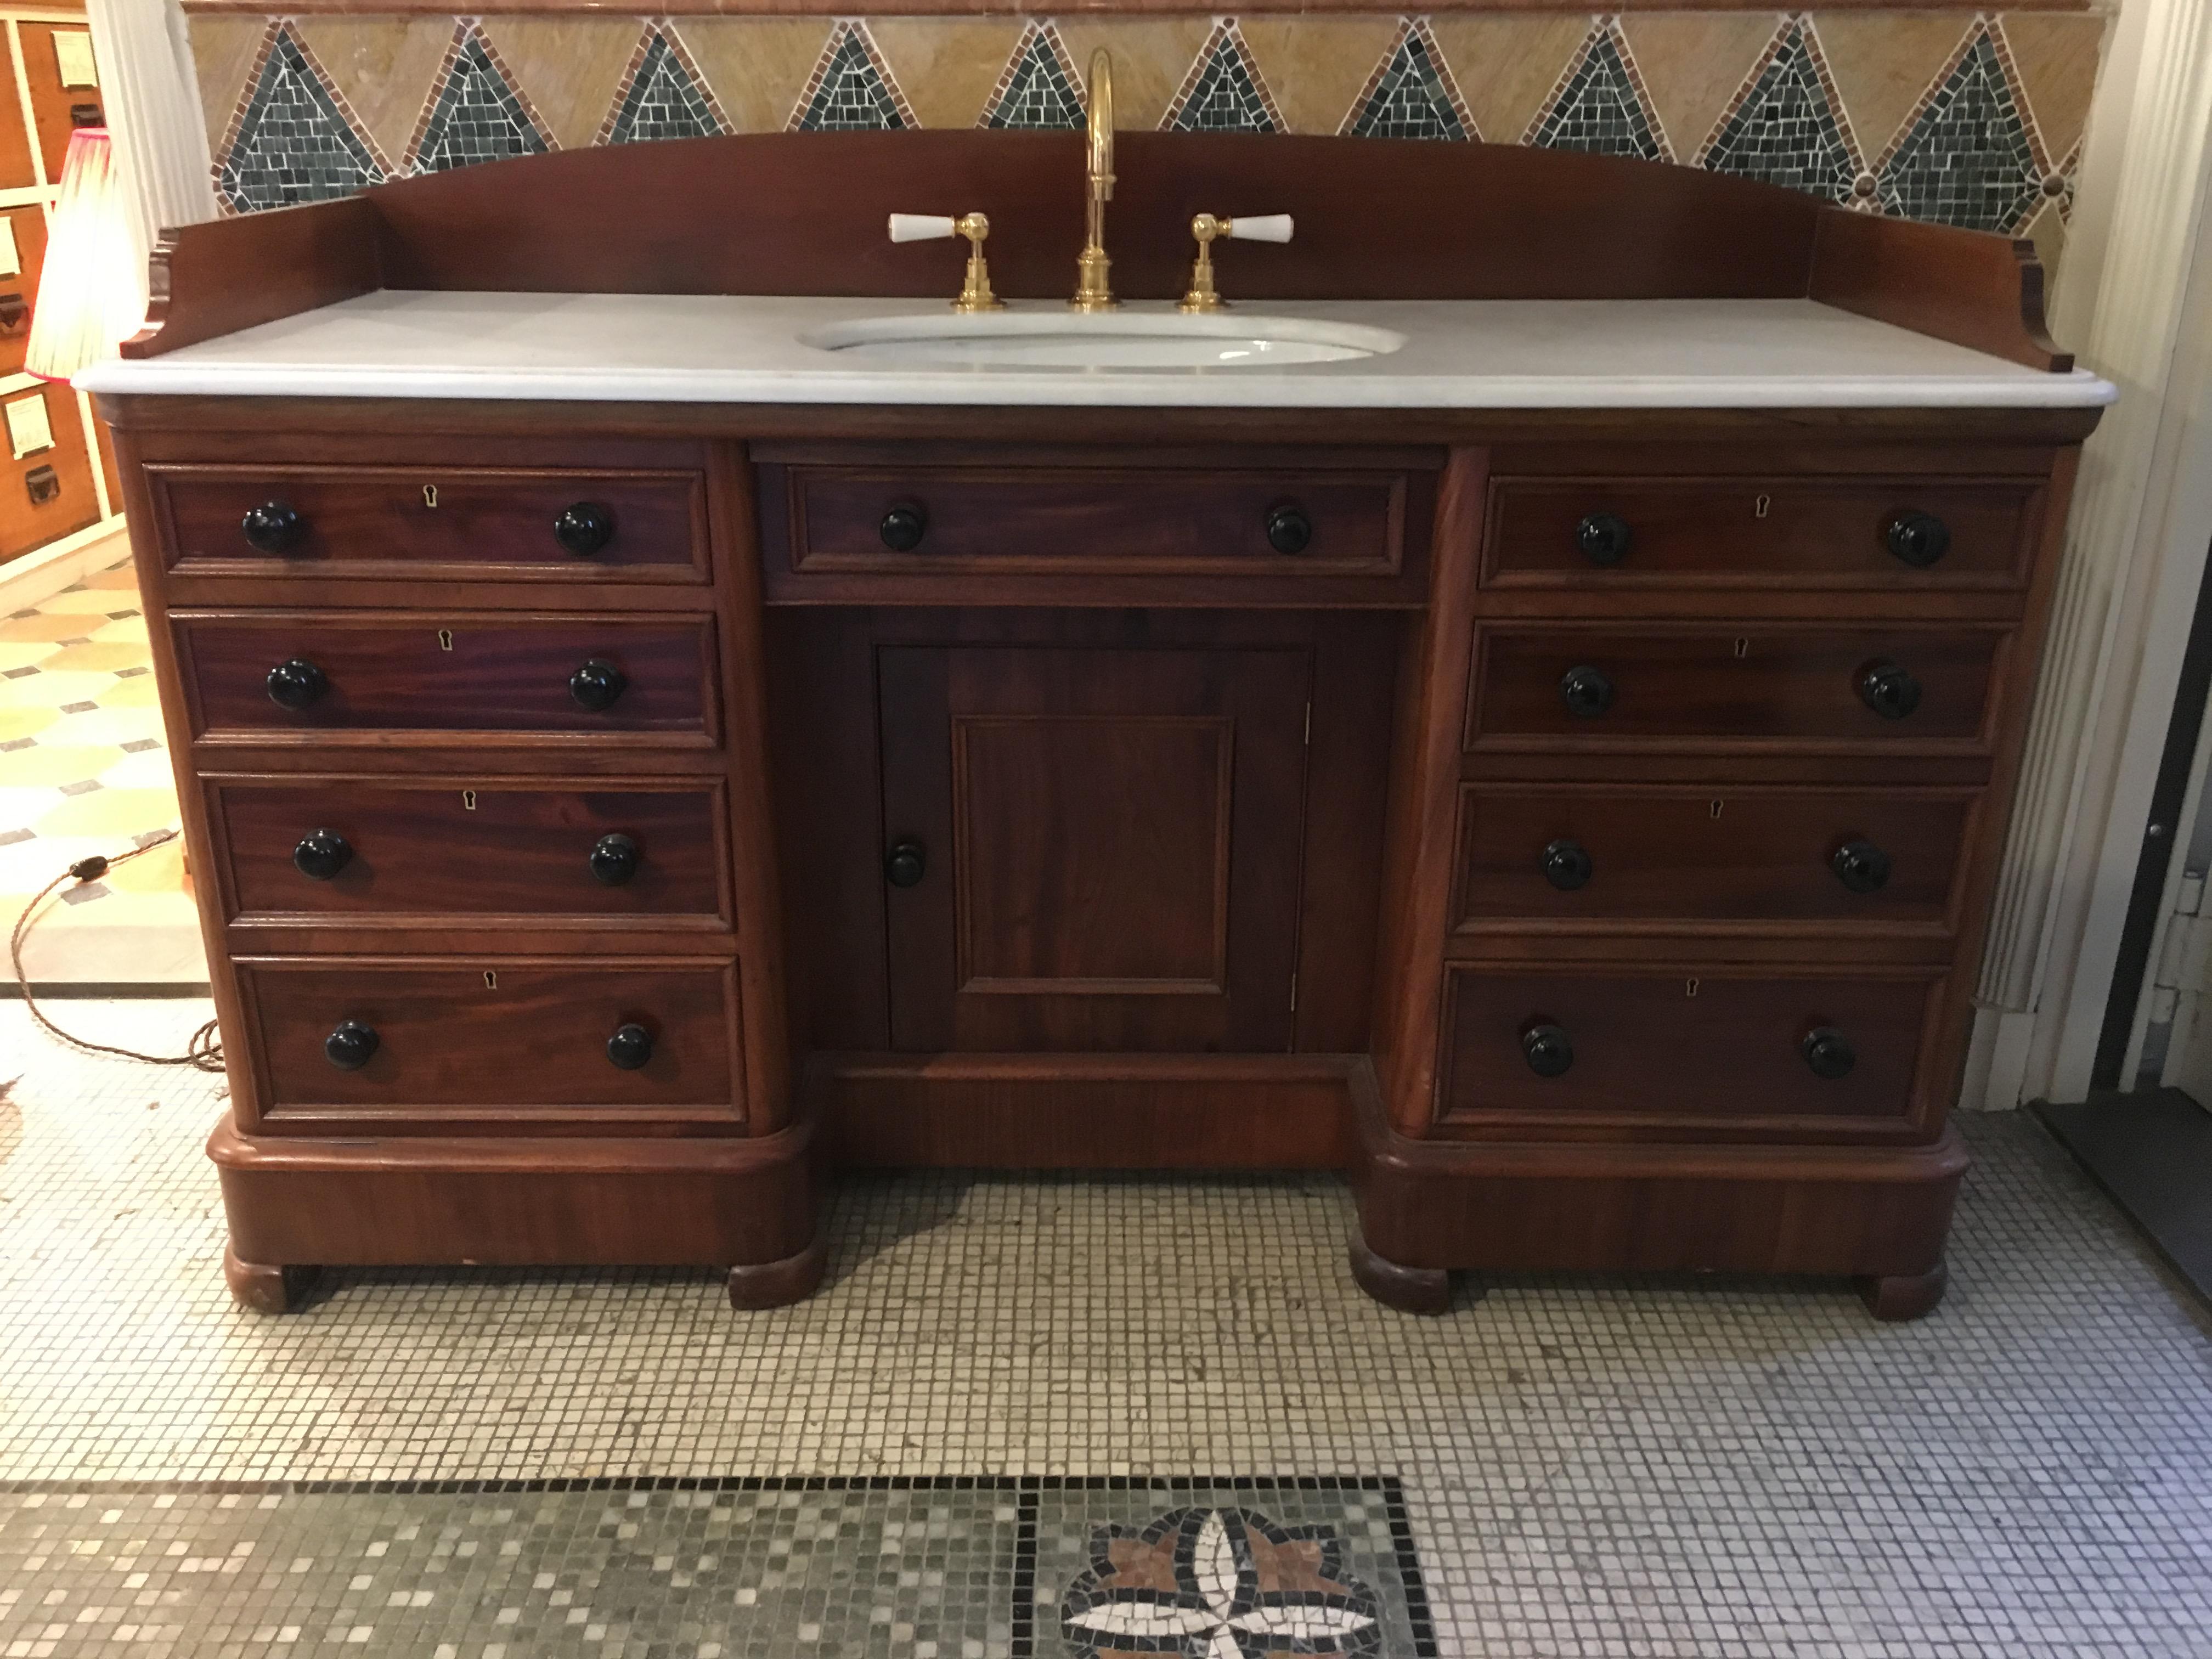 19th century English mahogany cupboard sink with Carrara Marble Top, 1890s
Measures: Depth cm. 56, Width cm. 150, Height cm. 82, Total Height cm. 97
(The faucets you can see on the sink are from 